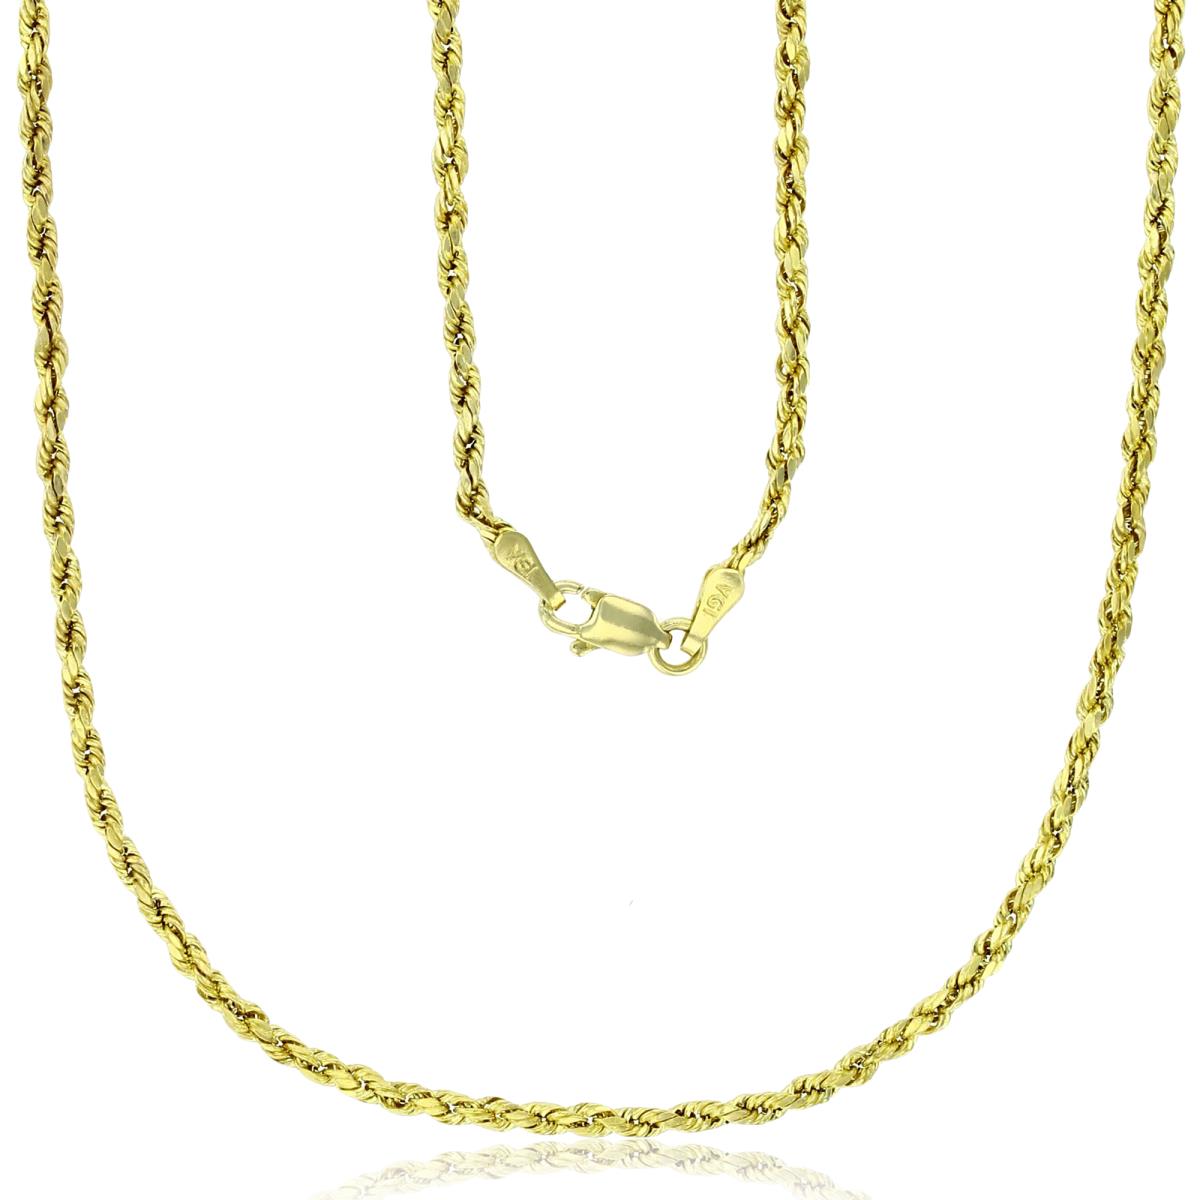 10k Yellow Gold 2mm DC Hollow Rope 016 7.25" Chain Bracelet